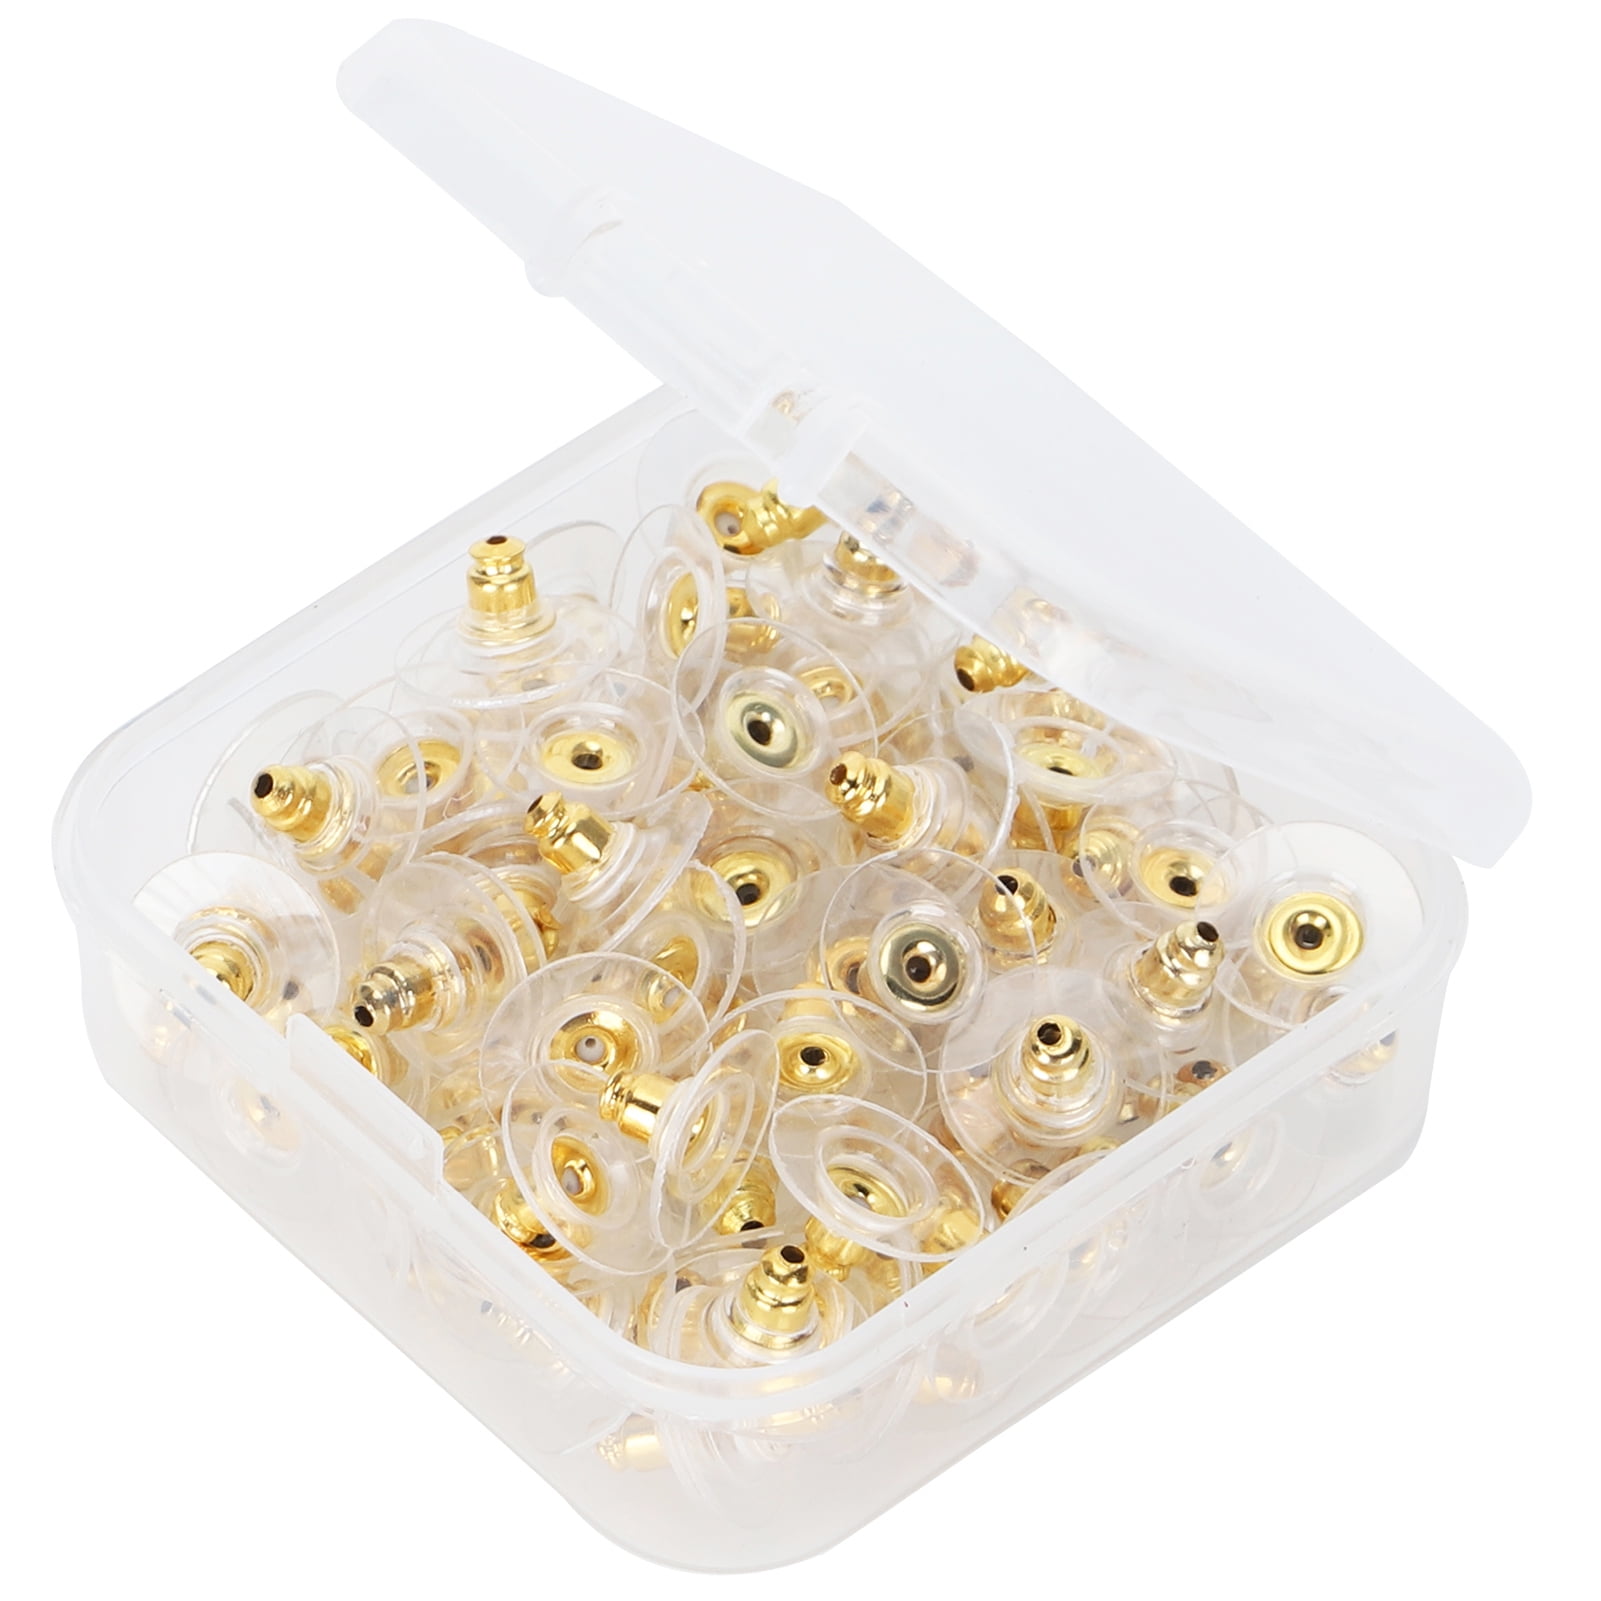 Shop Beebeecraft 40Pcs 4 Colors Silicone Earring Backs Star Shape Locking  Secure Back of Earring Replacement Clear Secure Pierced Earring Backs  Stopper for Diamond Studs Heavy Droopy Earrings for Jewelry Making -